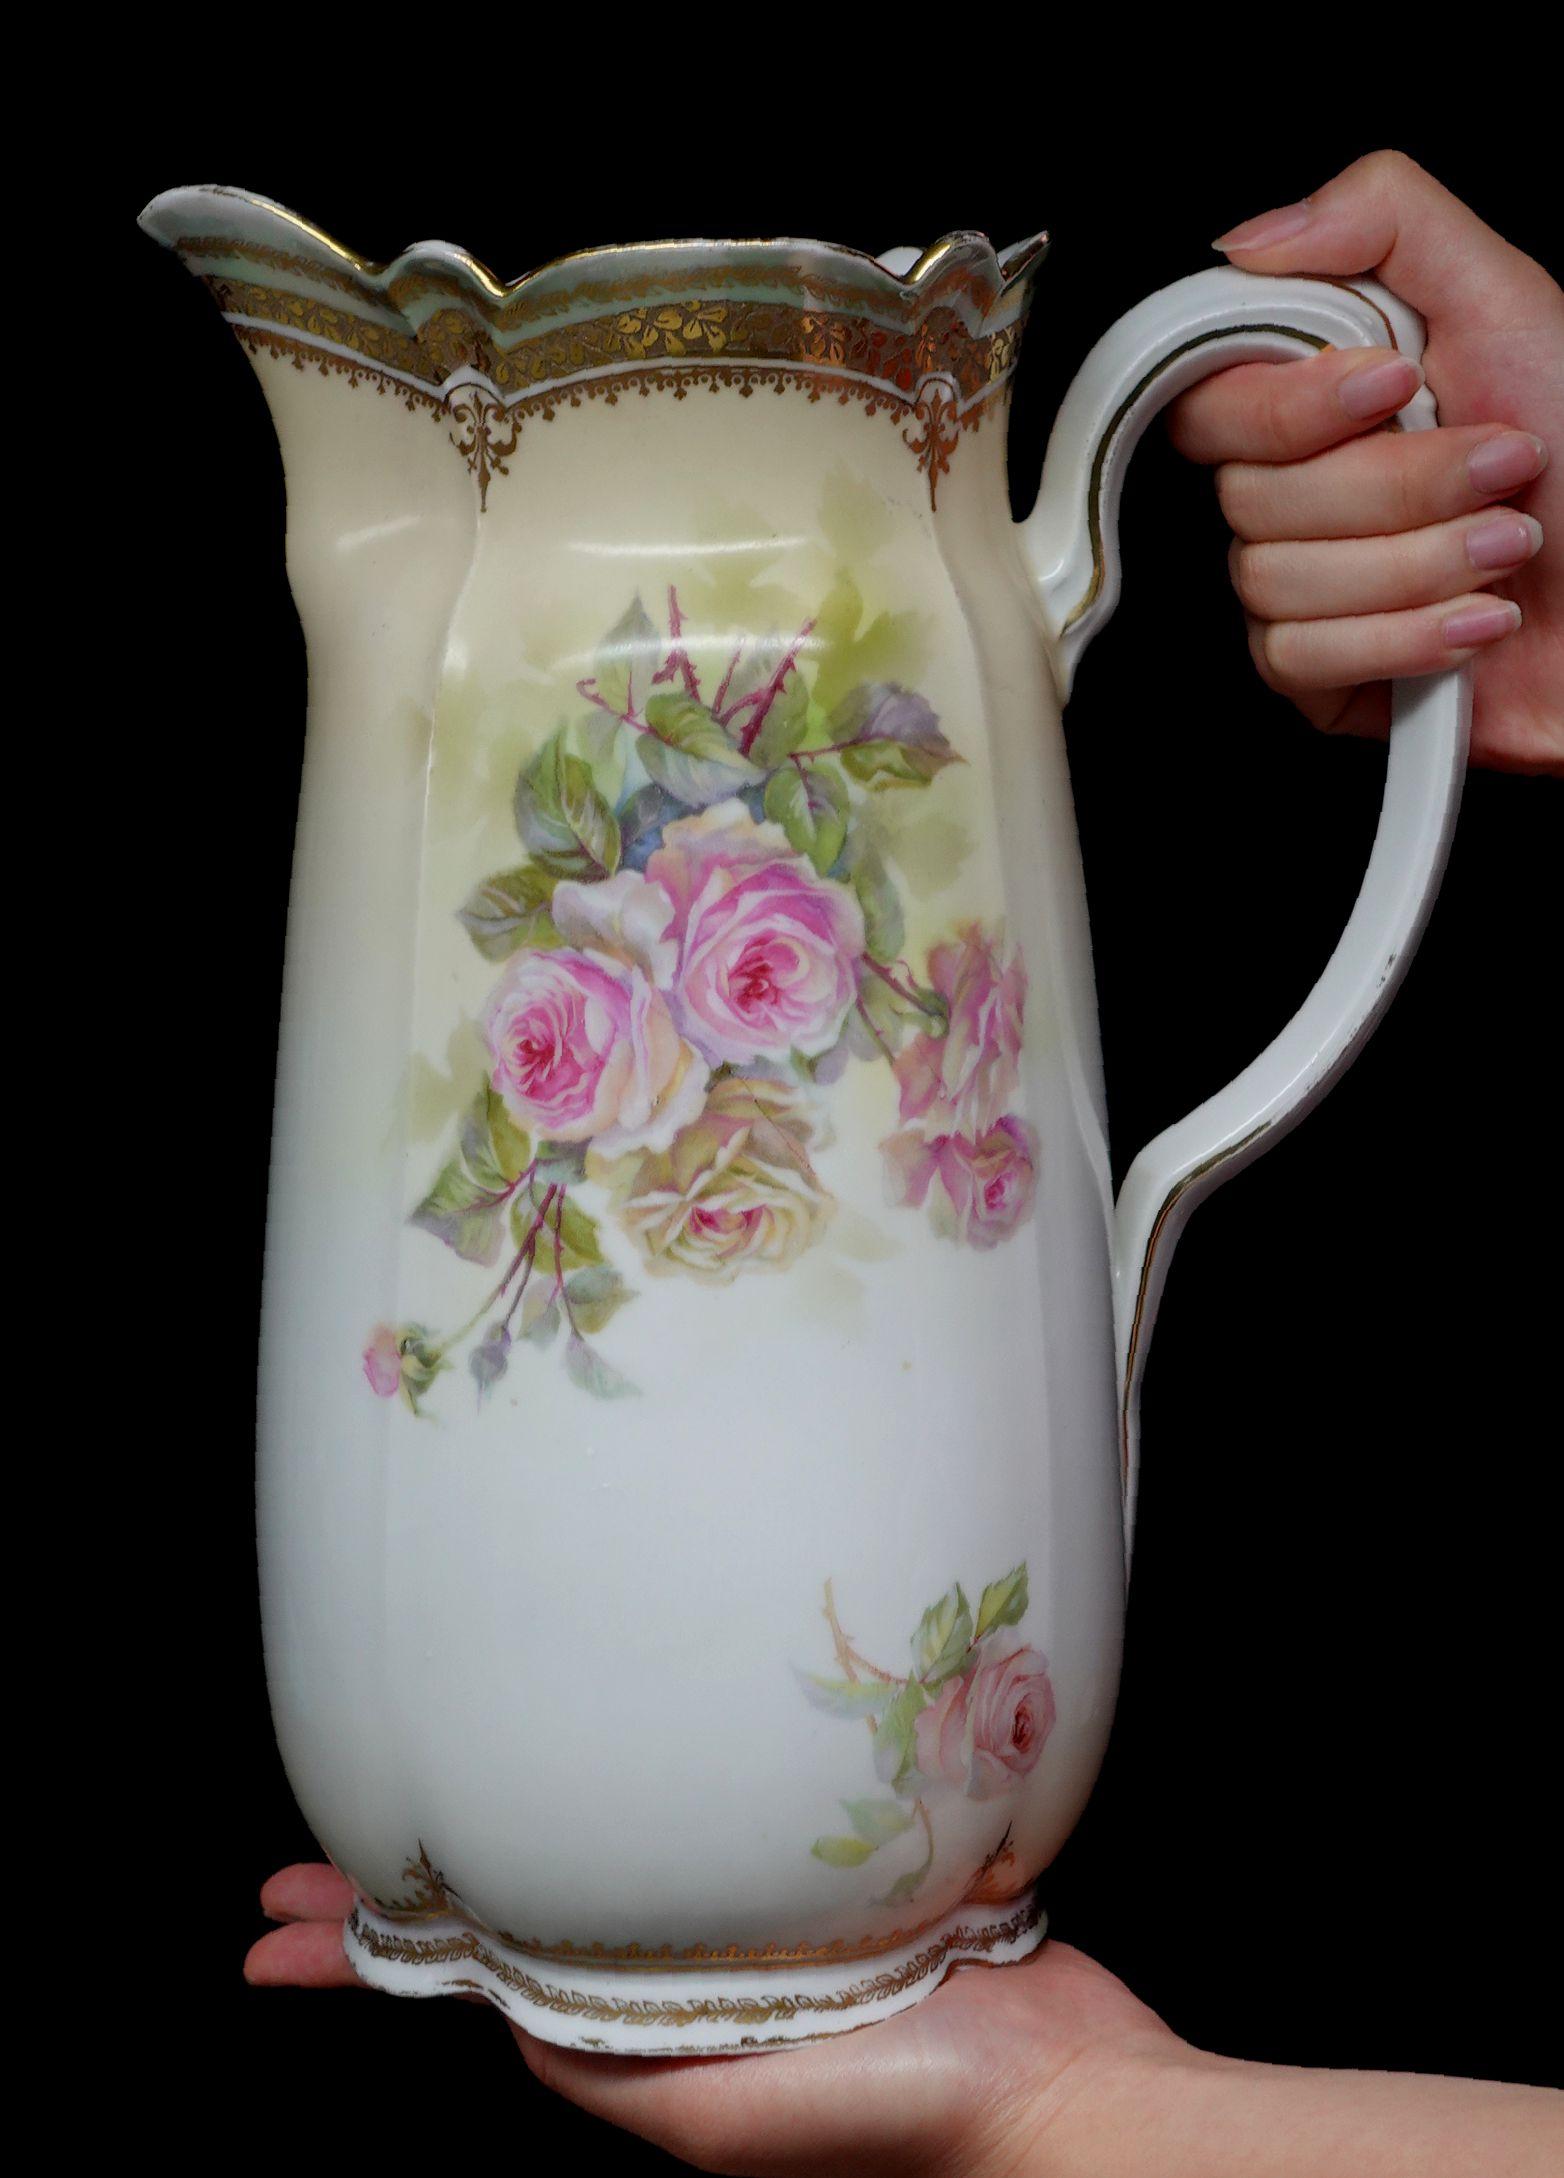 A wonderful antique S&T RS Germany large Tankard absolutely 100% hand-painted floral roses in the multi-colored pink, purple, red, and rich green leaves, delicate arrangement of the composition, more in some places but less in opposite locations.